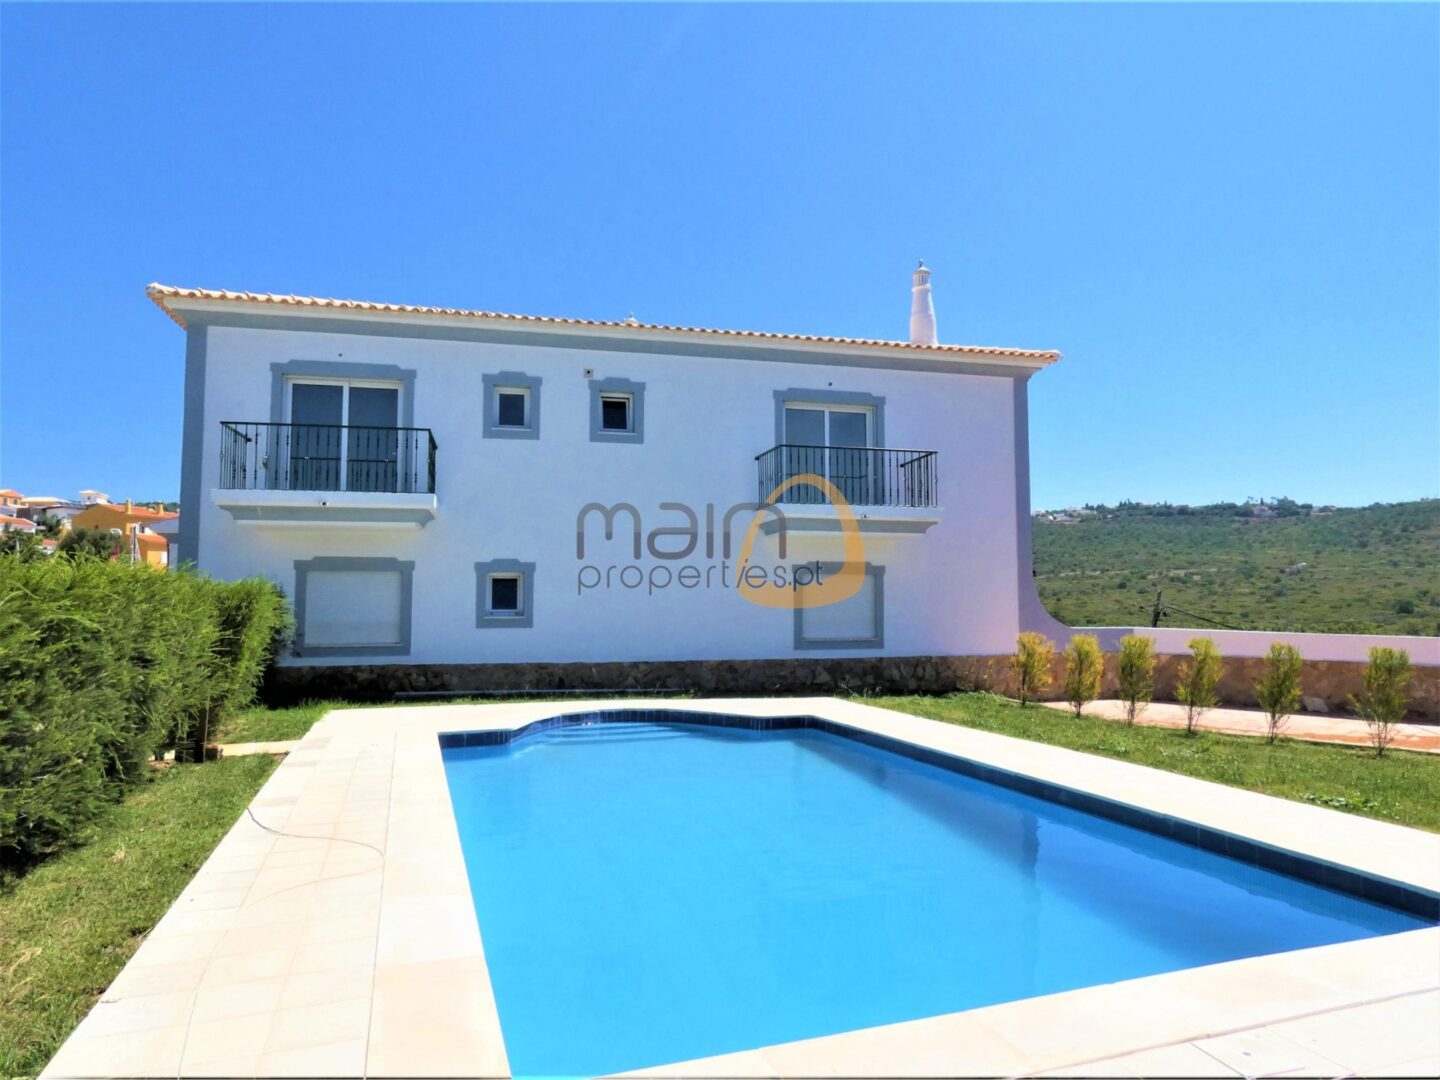 New villa with 4 bedrooms, swimming pool and garden in the urbanization of Goncinha in Loulé